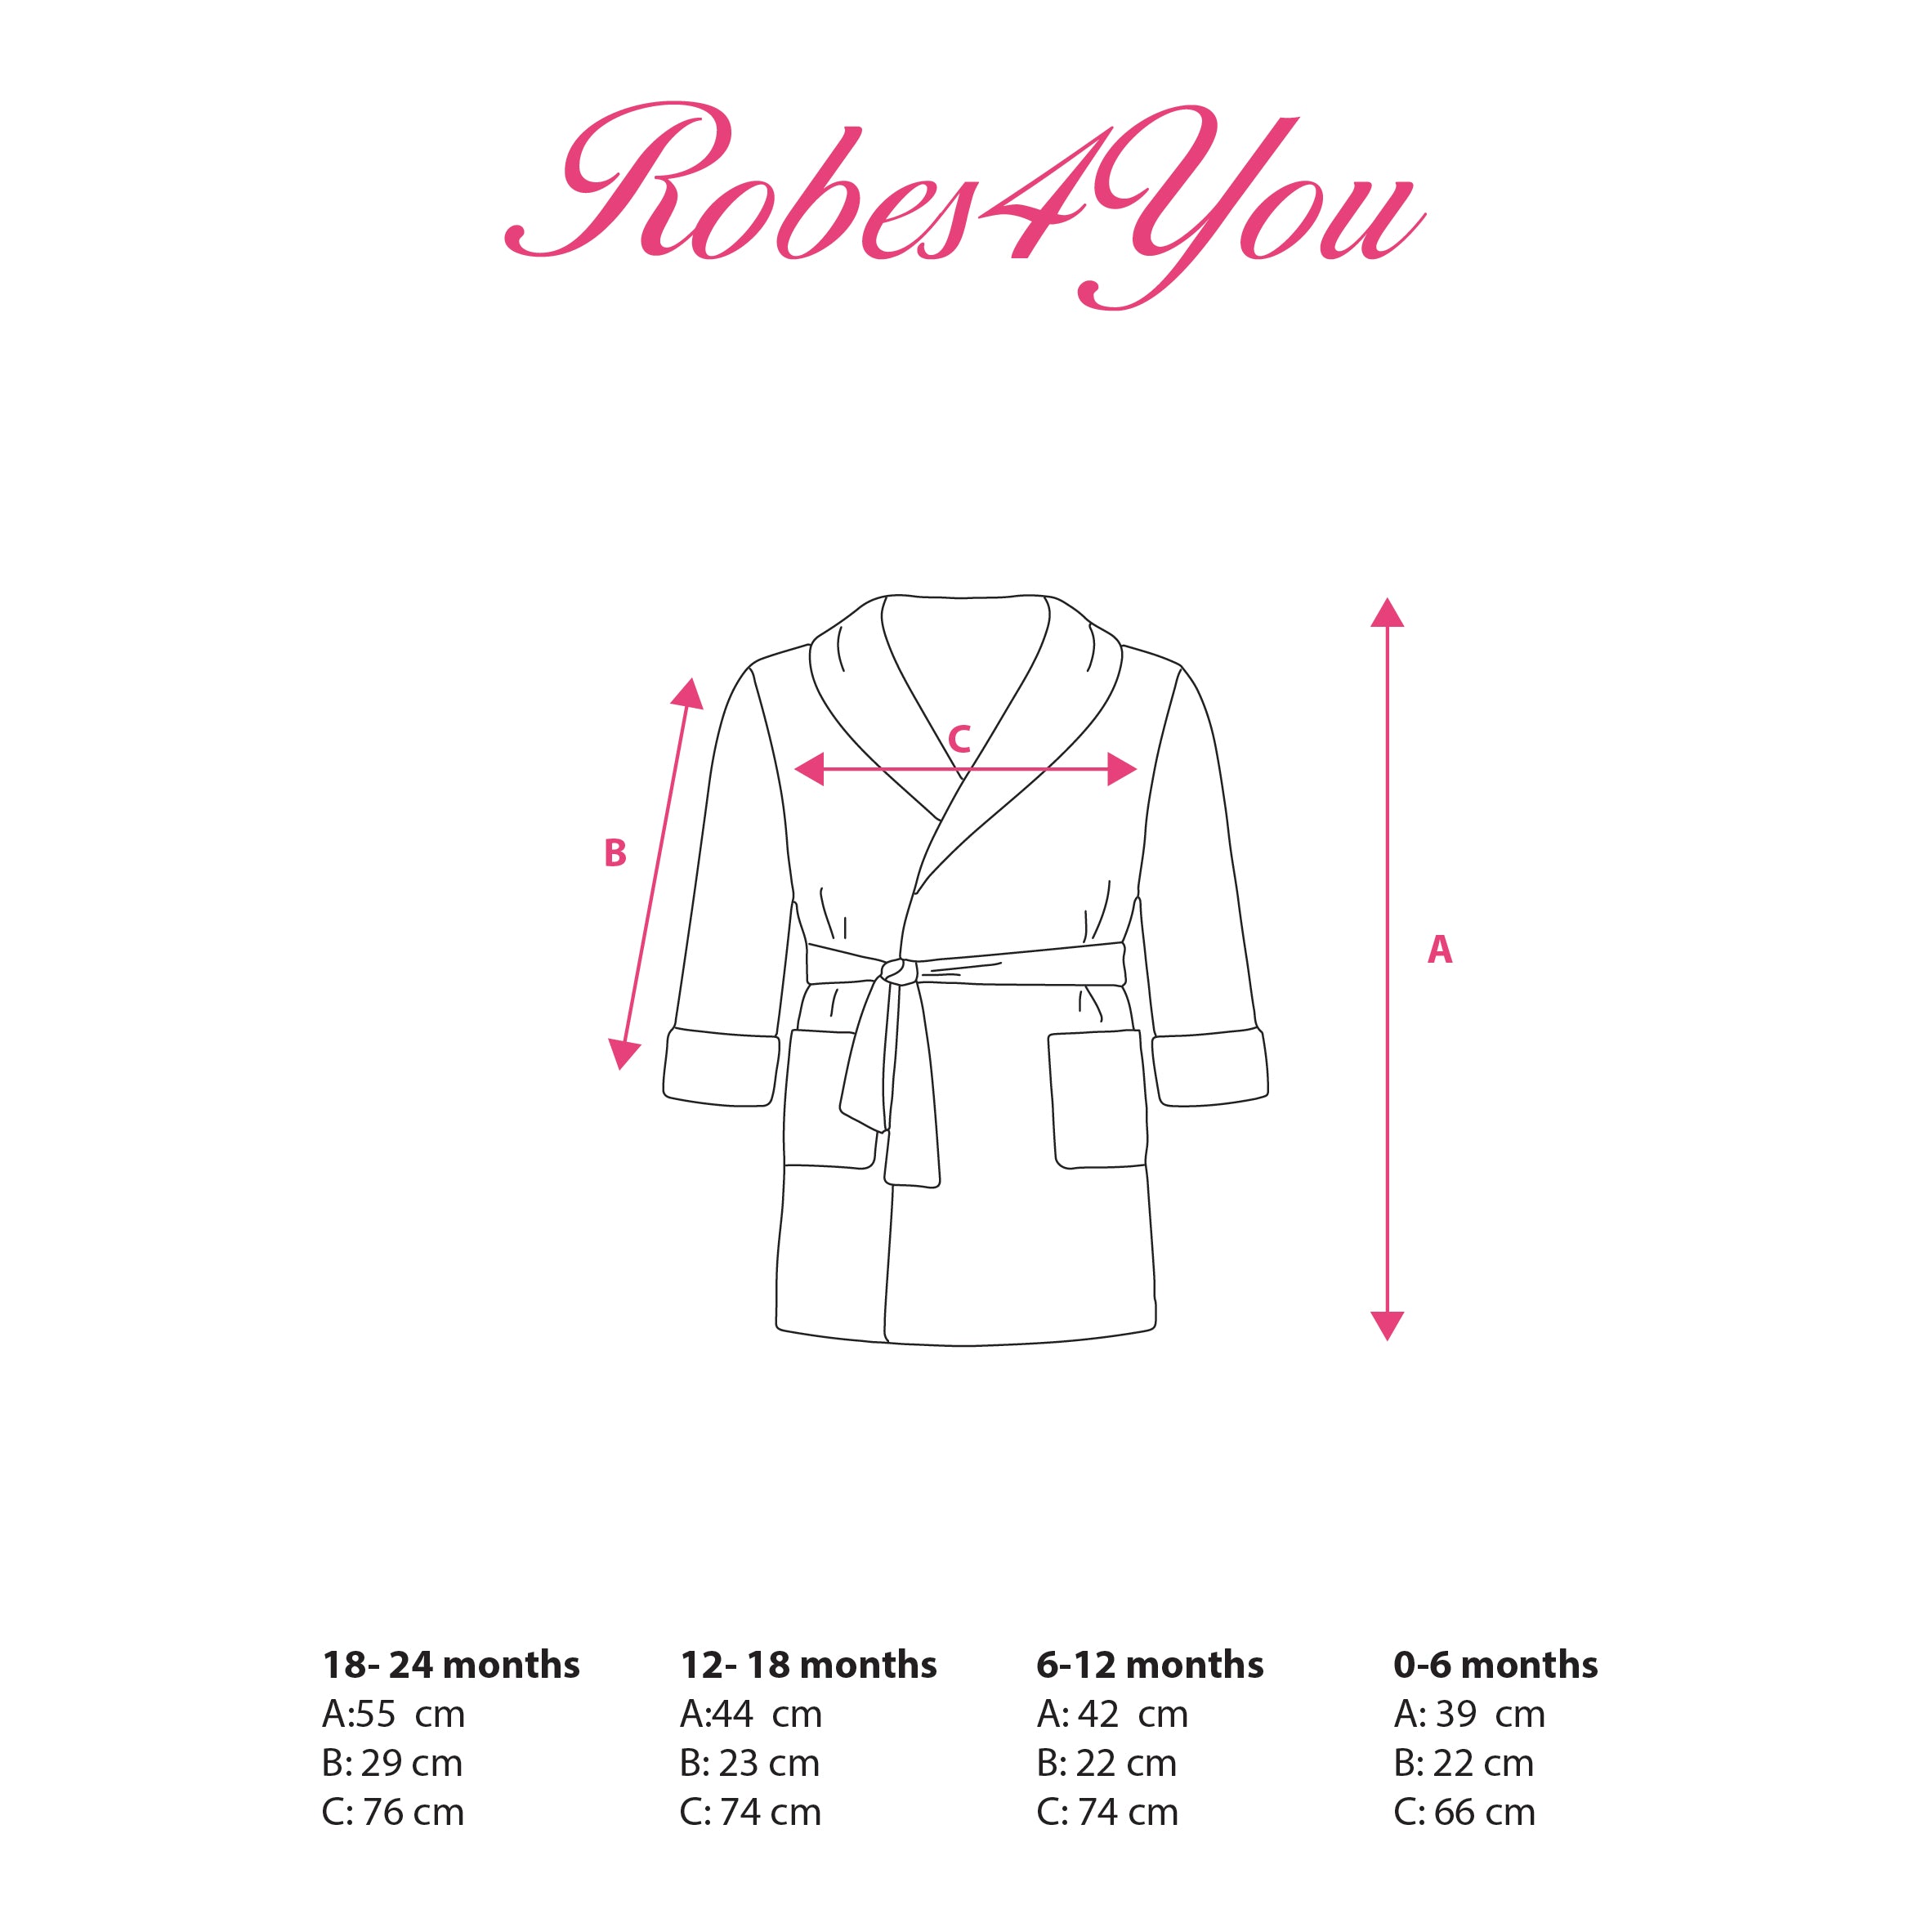 Baby robe sizing-robes4you 